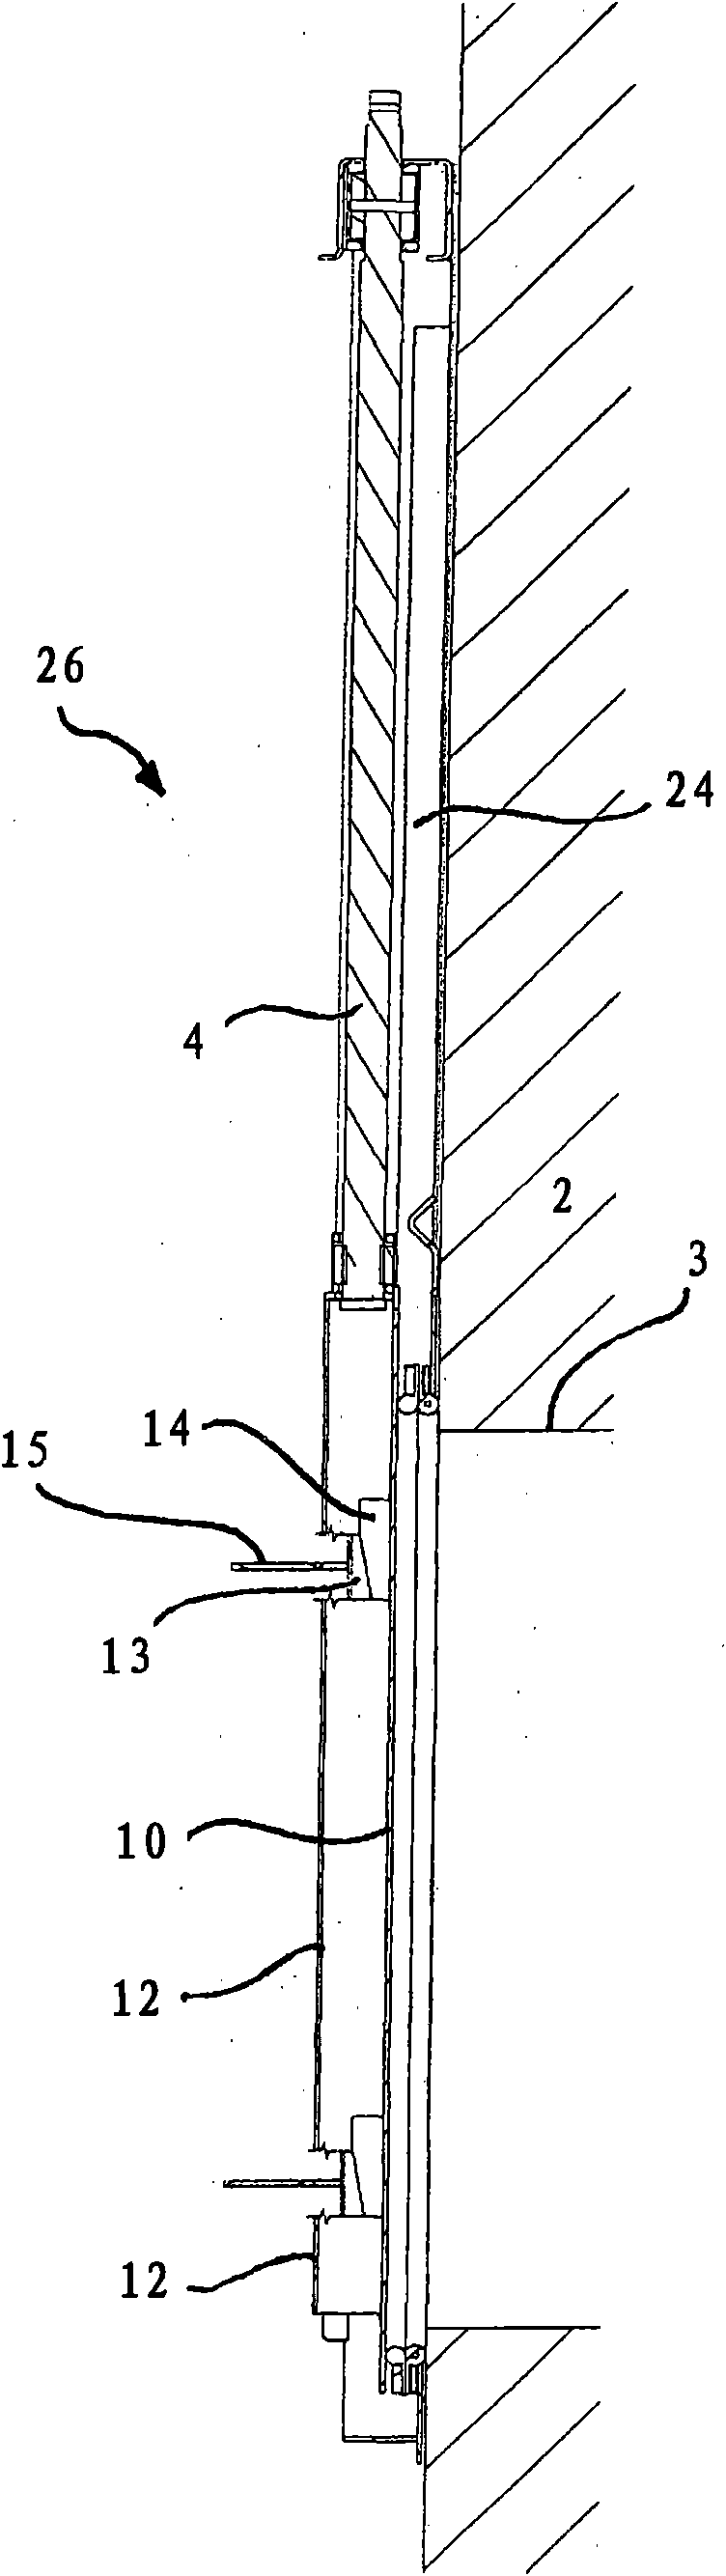 Double side acting sealing ring for valve device